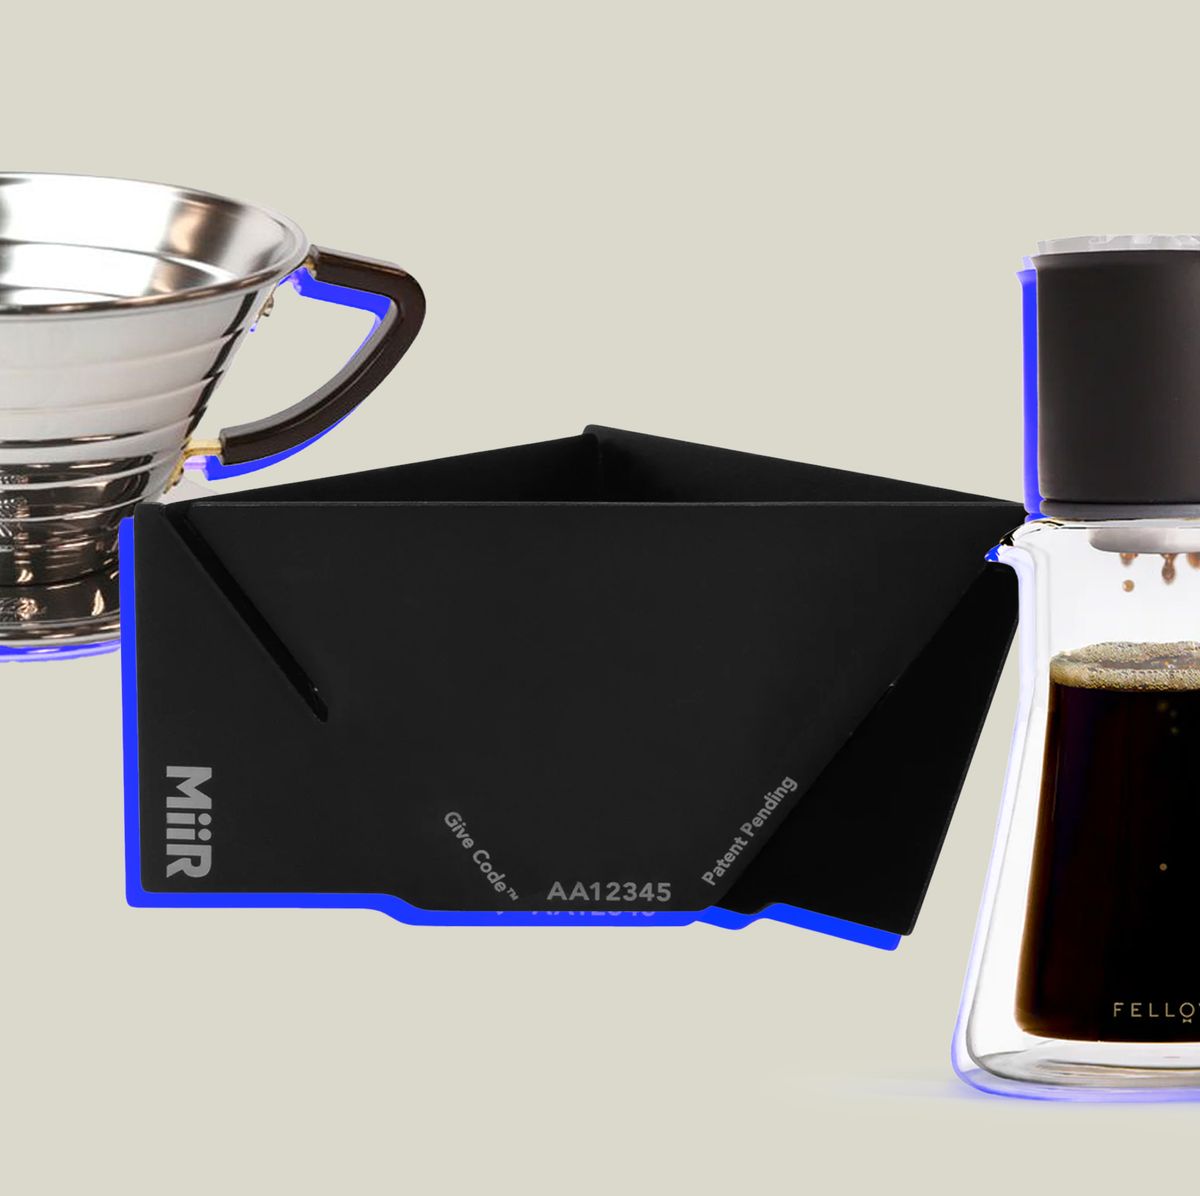 The Best Pour-Over Coffee Gear in 2020